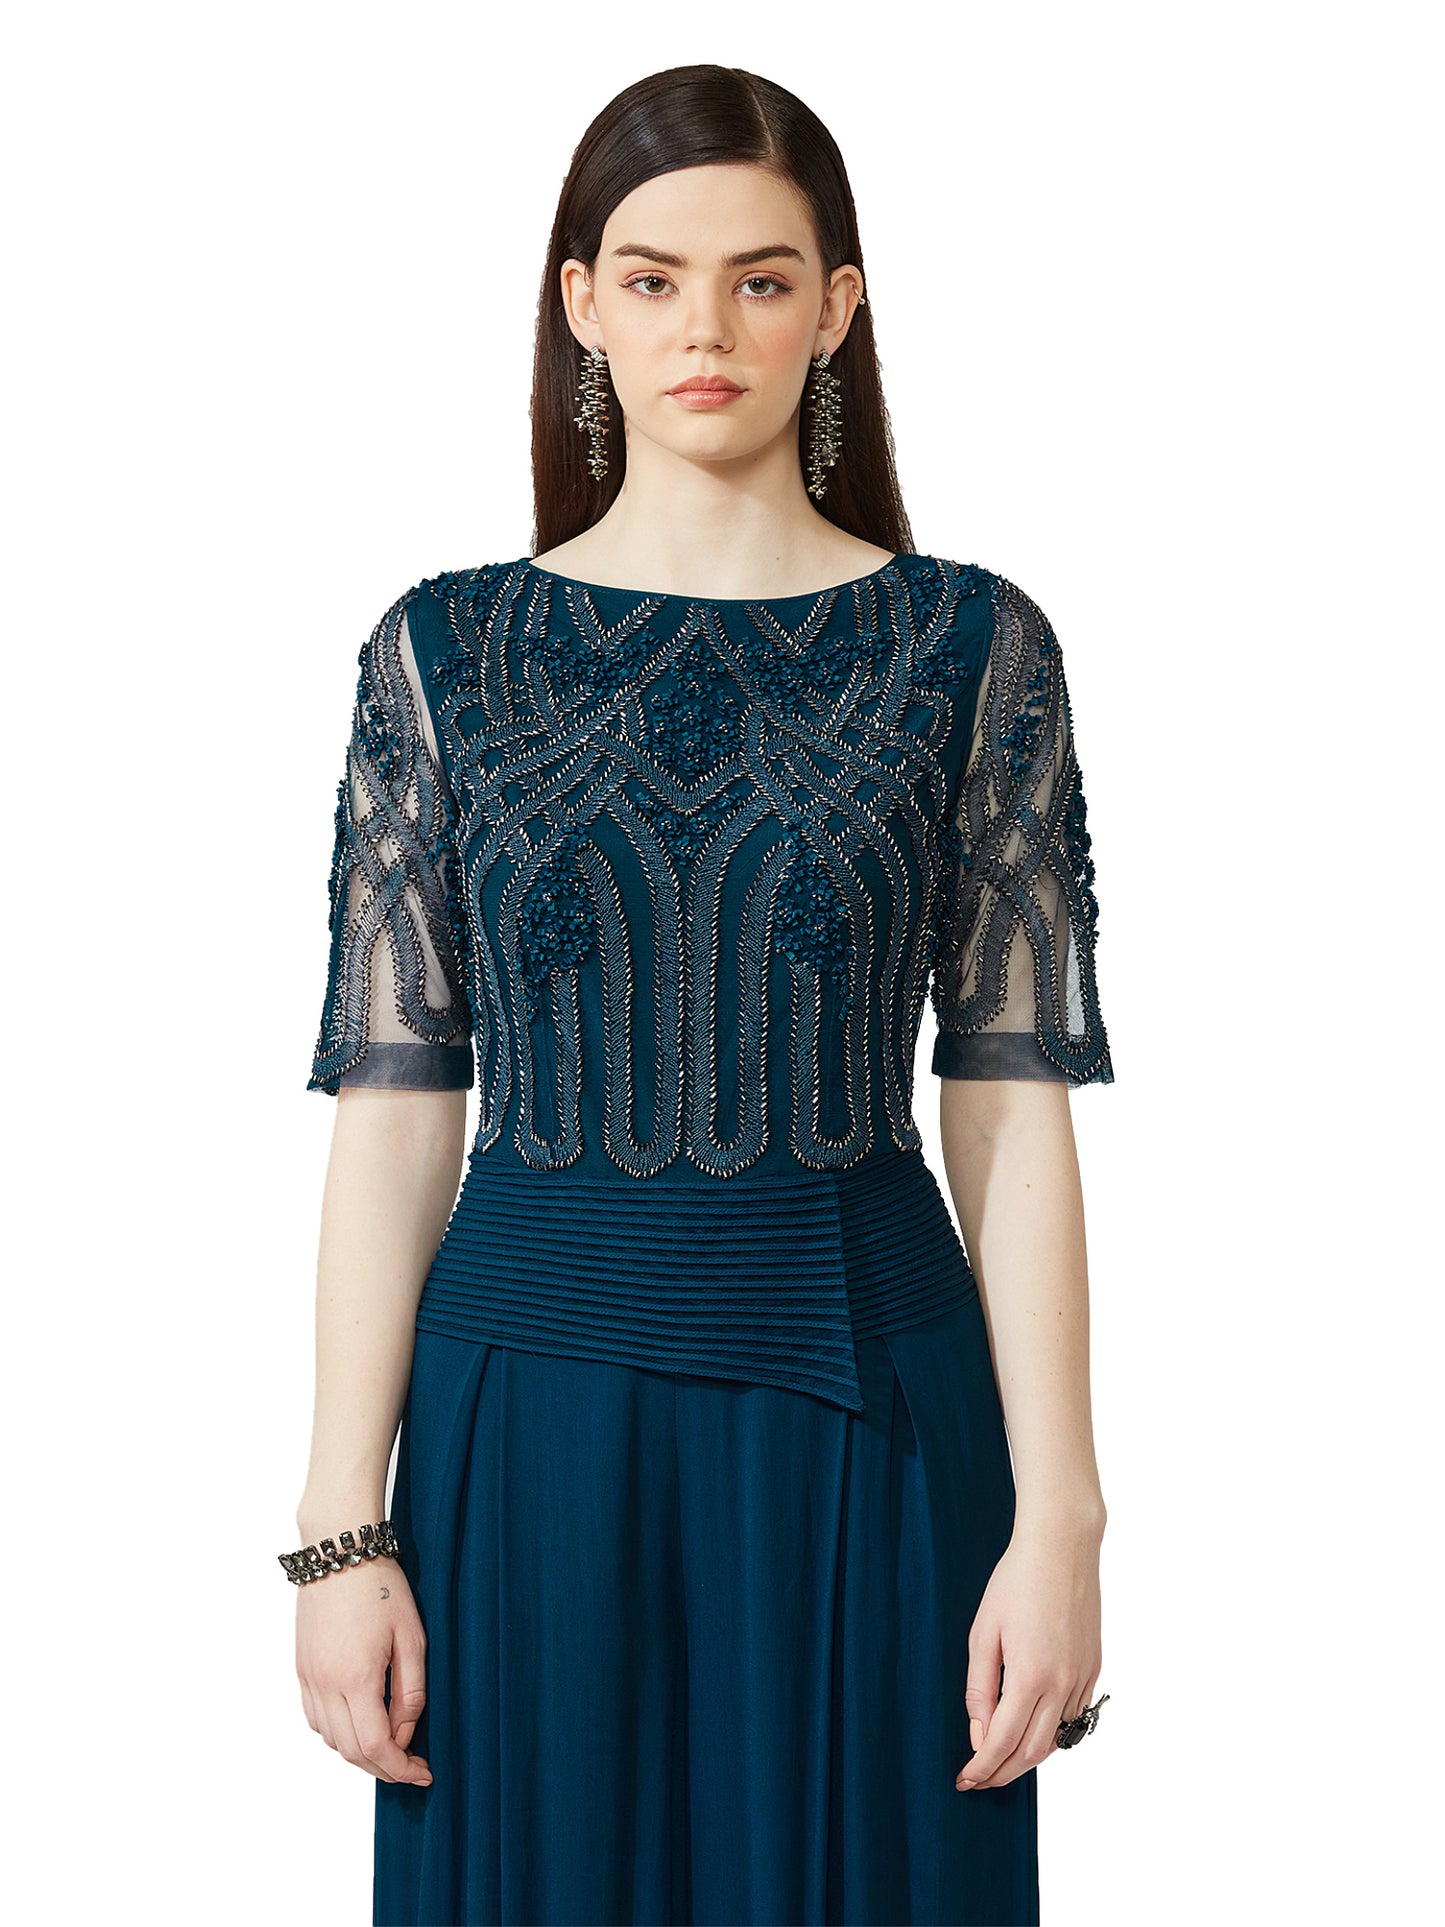 Galaxy Blue Embroidered Peplum Top With Skirt